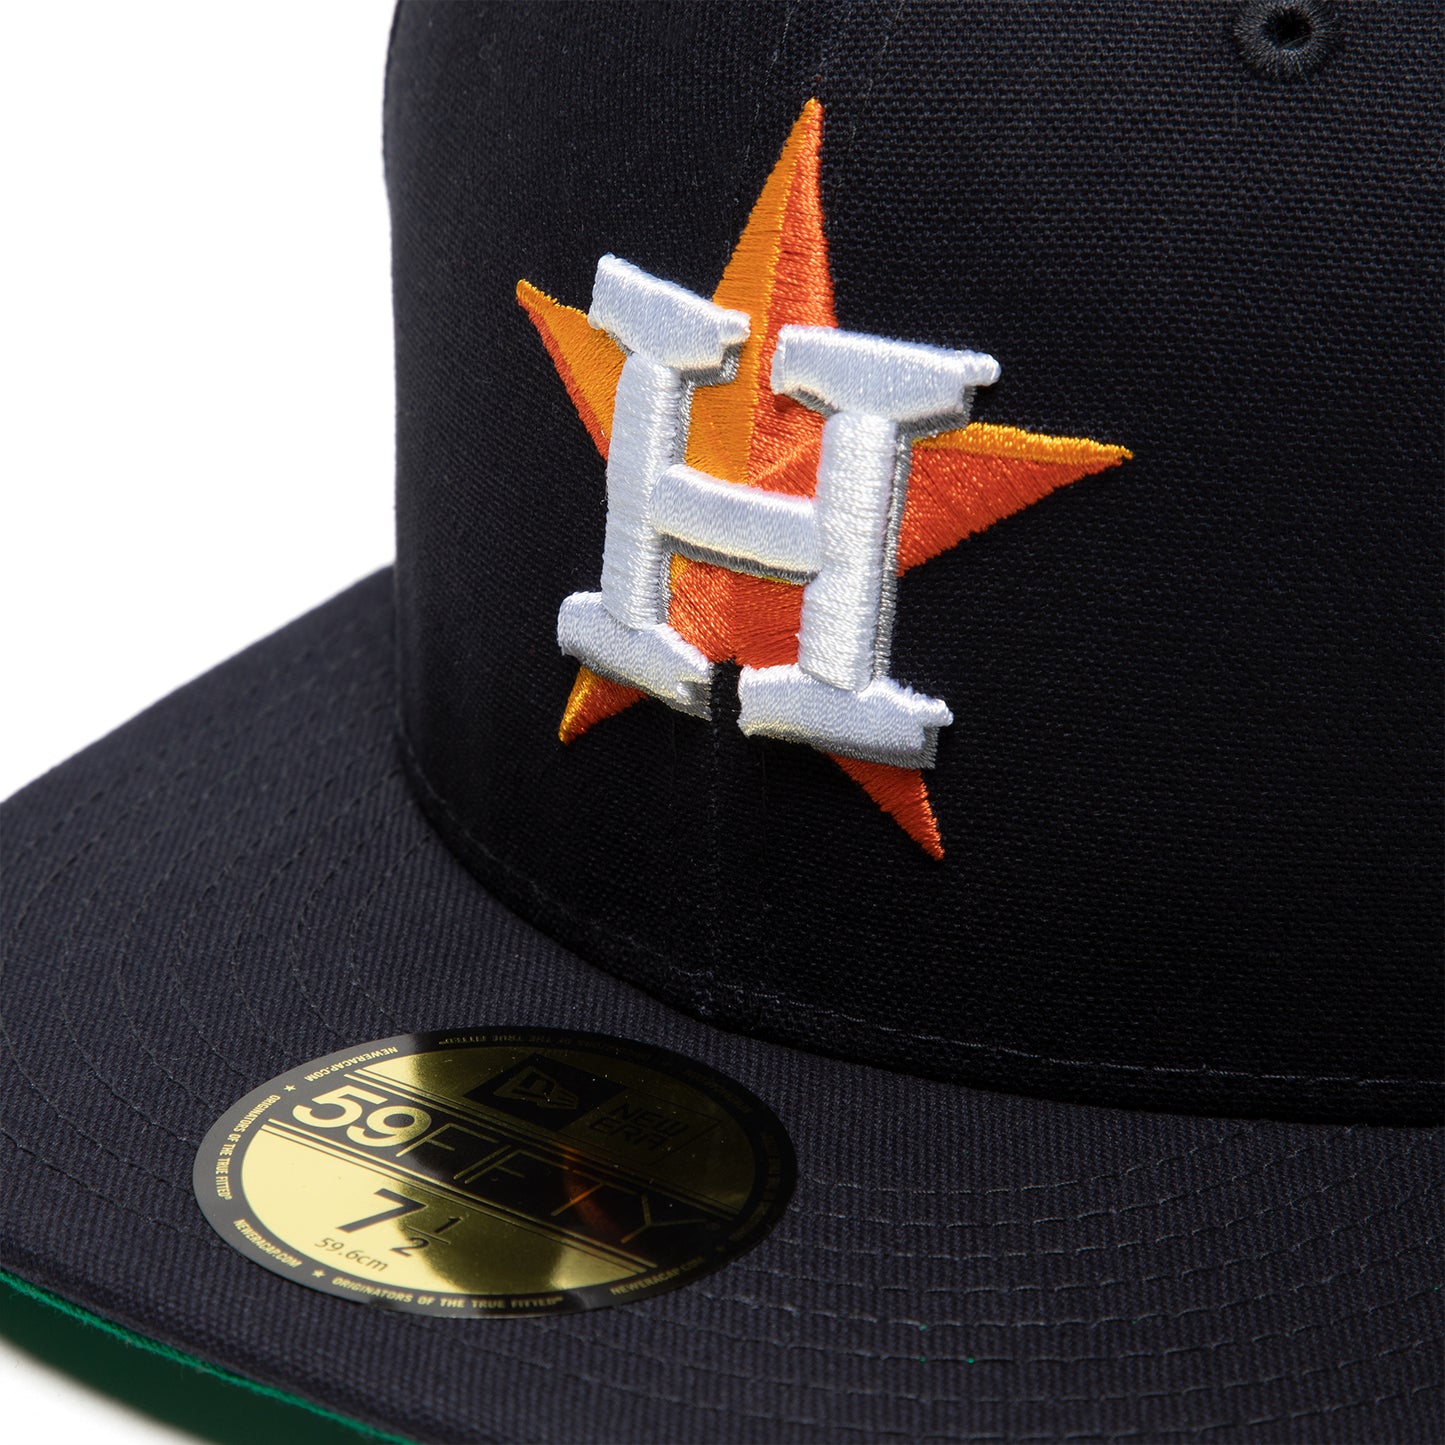 New Era x Eric Emanuel Houston Astros Fitted Hat (Navy)